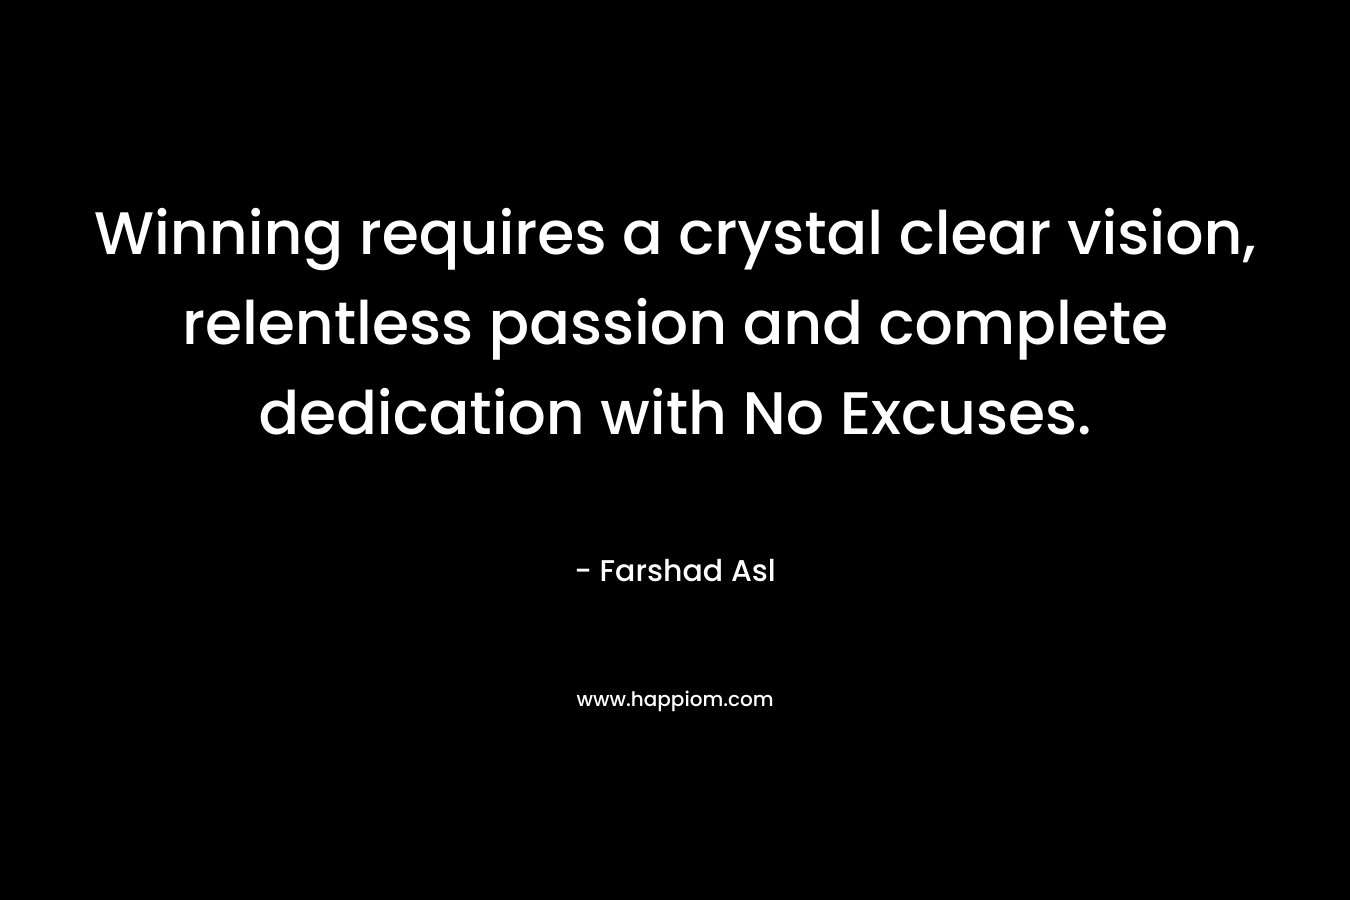 Winning requires a crystal clear vision, relentless passion and complete dedication with No Excuses.